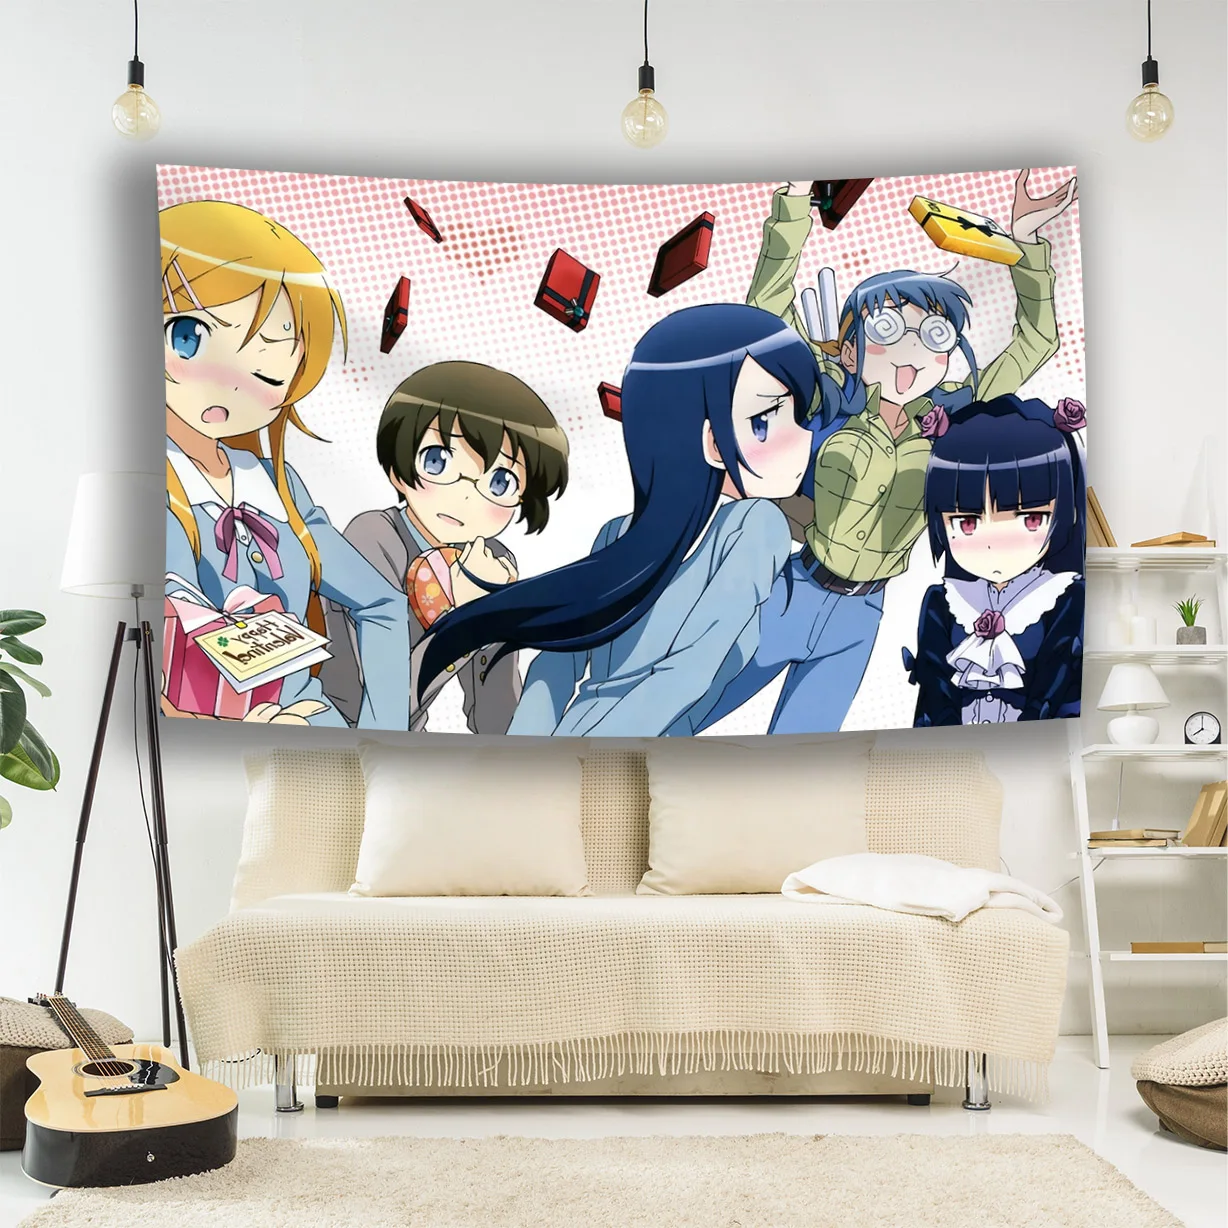 

Cute Girl Decorating Wall Tapestry Kawaii Anime Style Sad Bedroom Home Background